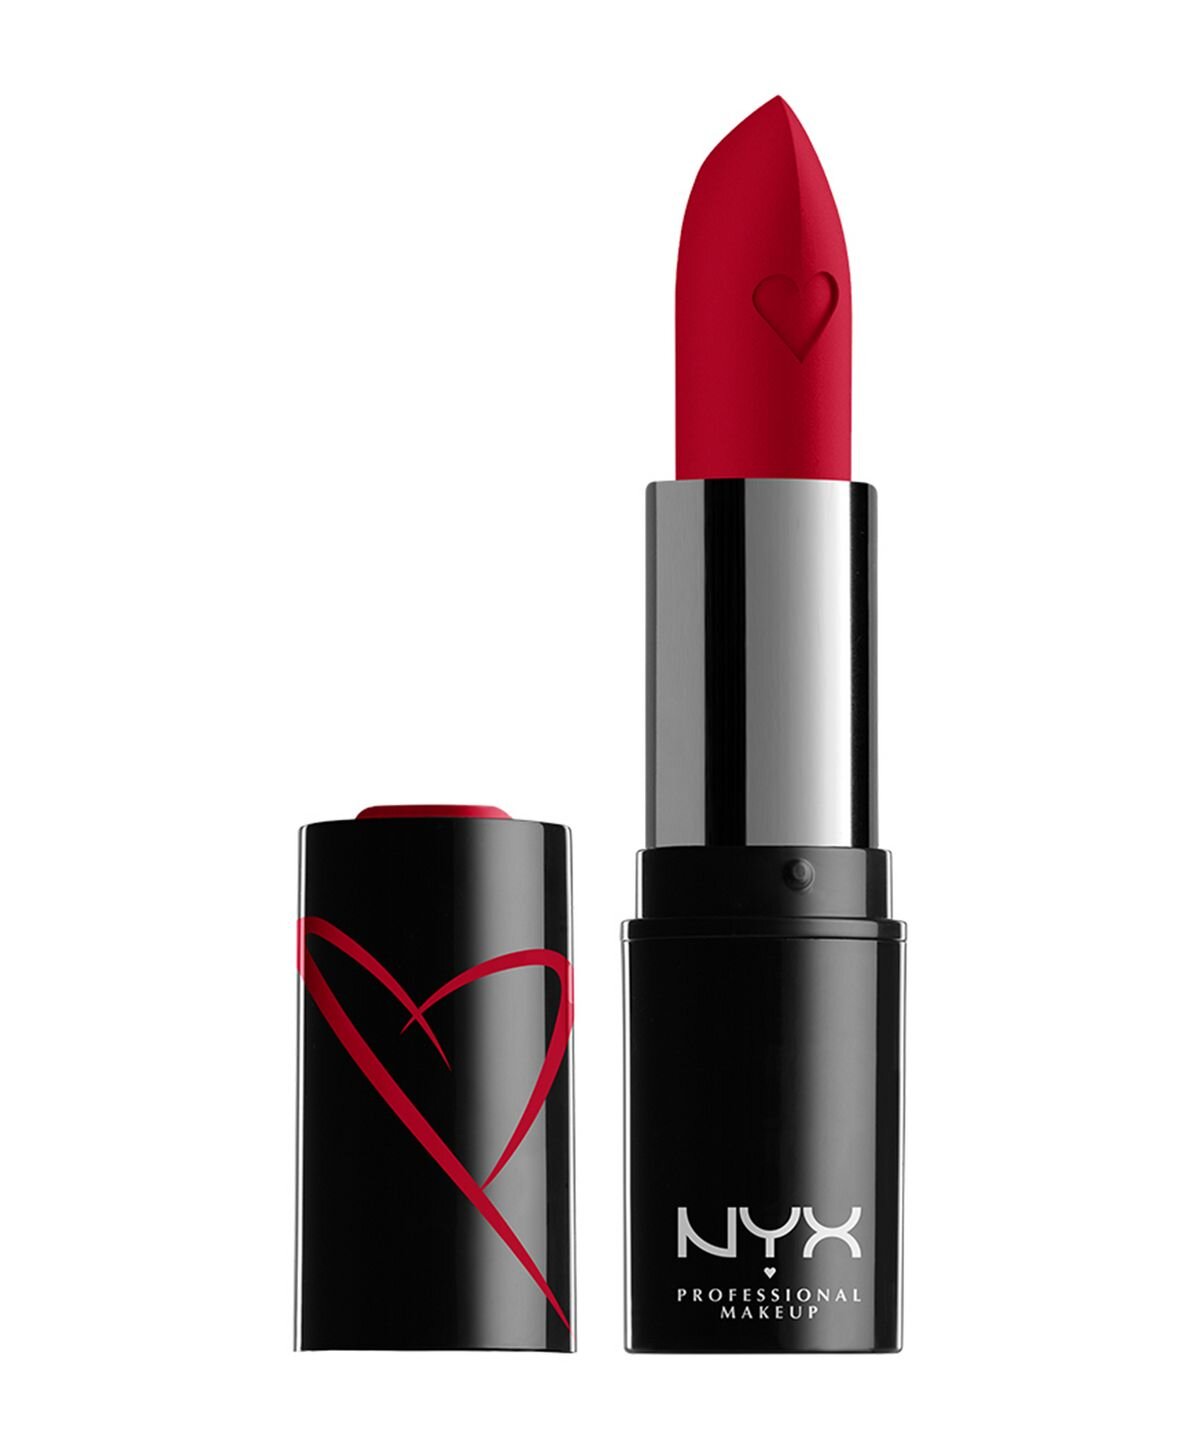 NYX Shout Loud Lipstick in The Best, £8